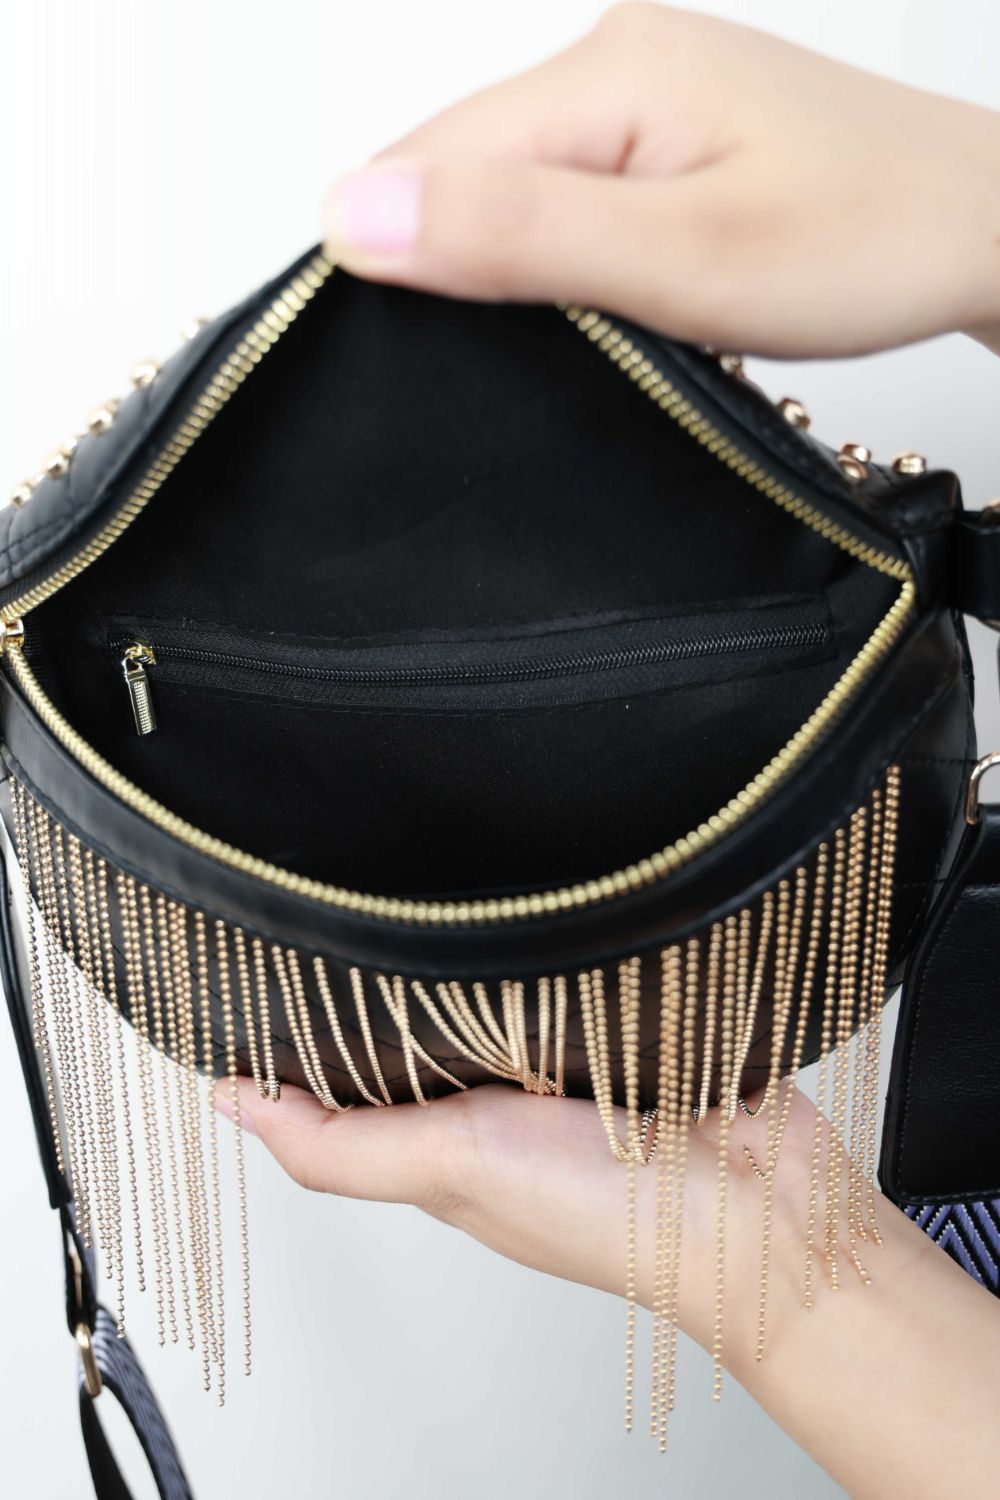 PU Leather Studded Sling Bag with Fringes - BEAUTY COSMOTICS SHOP